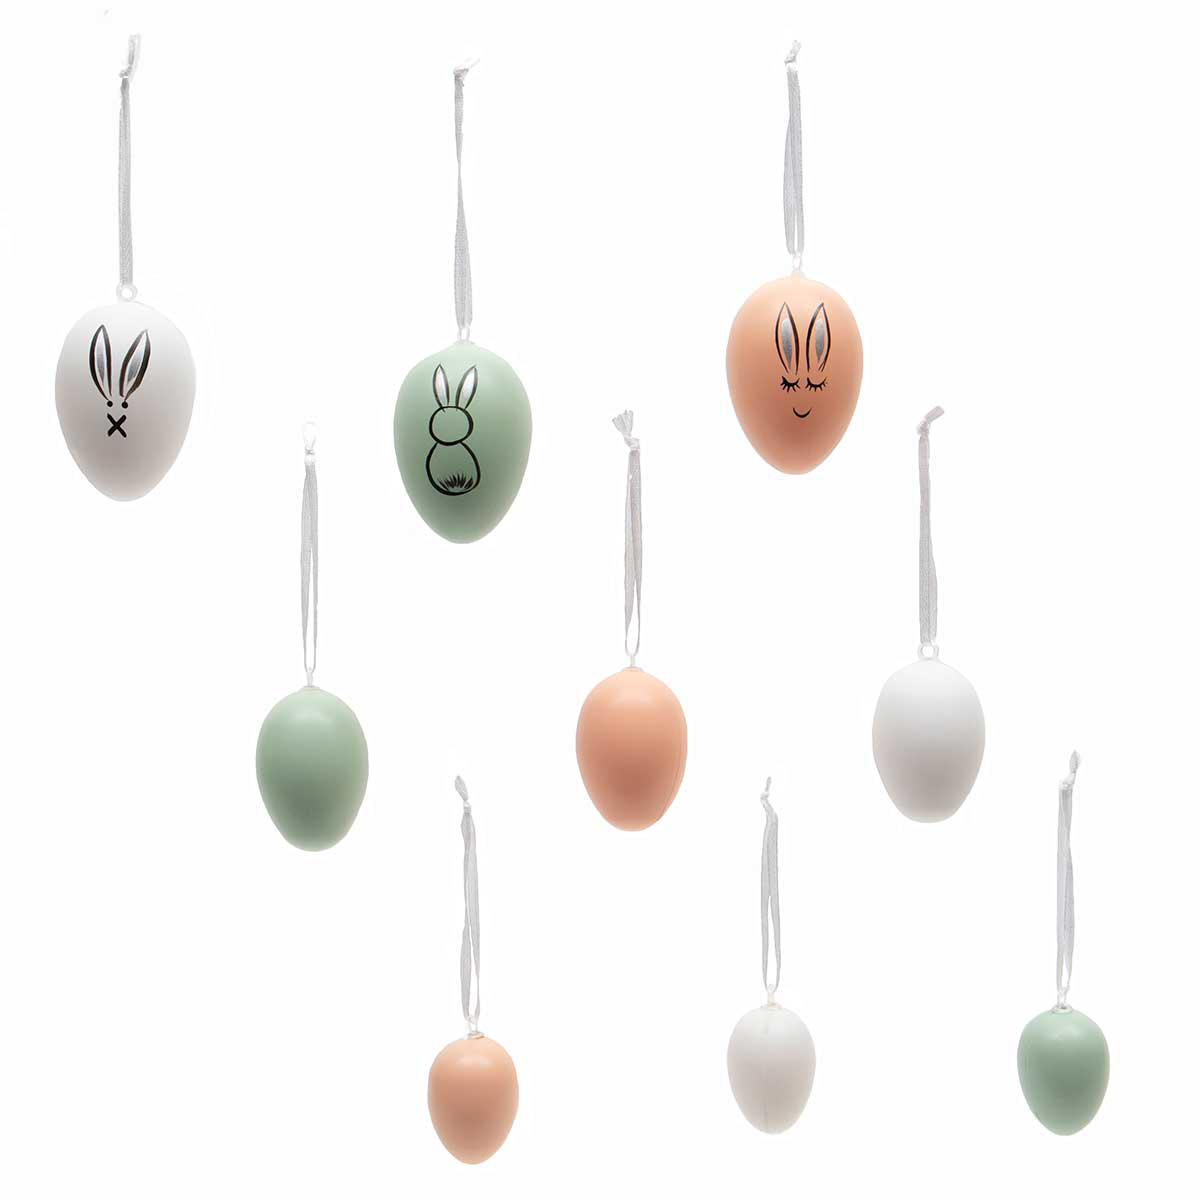 !Egg Ornament with Bunny Faces and Ribbon Hanger